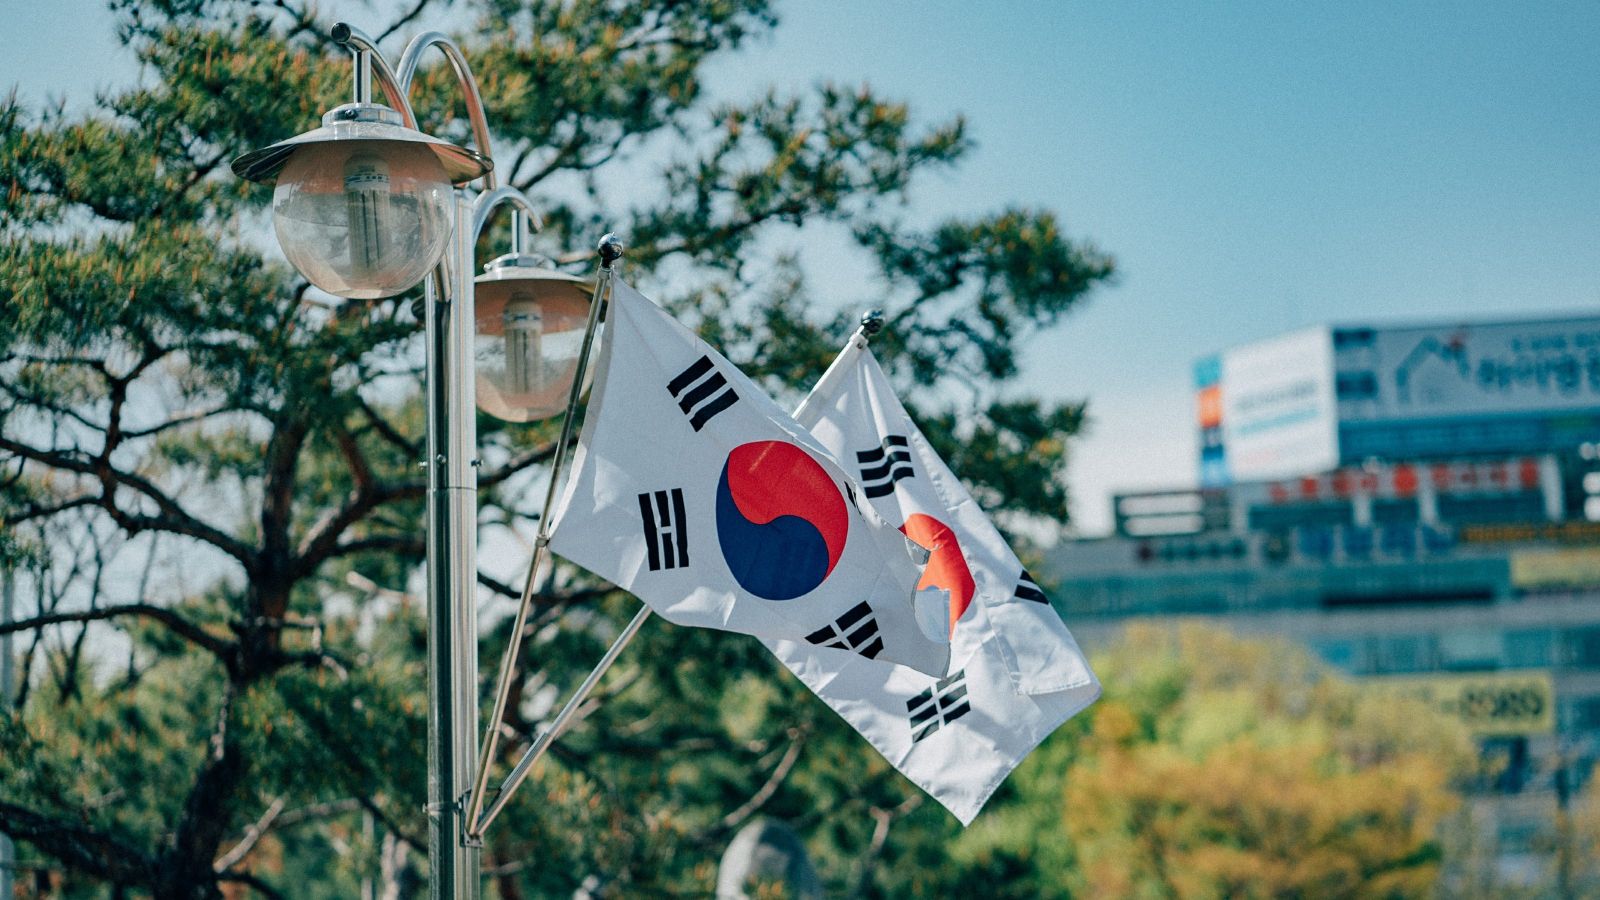 Two South Korea flags on a street lamp